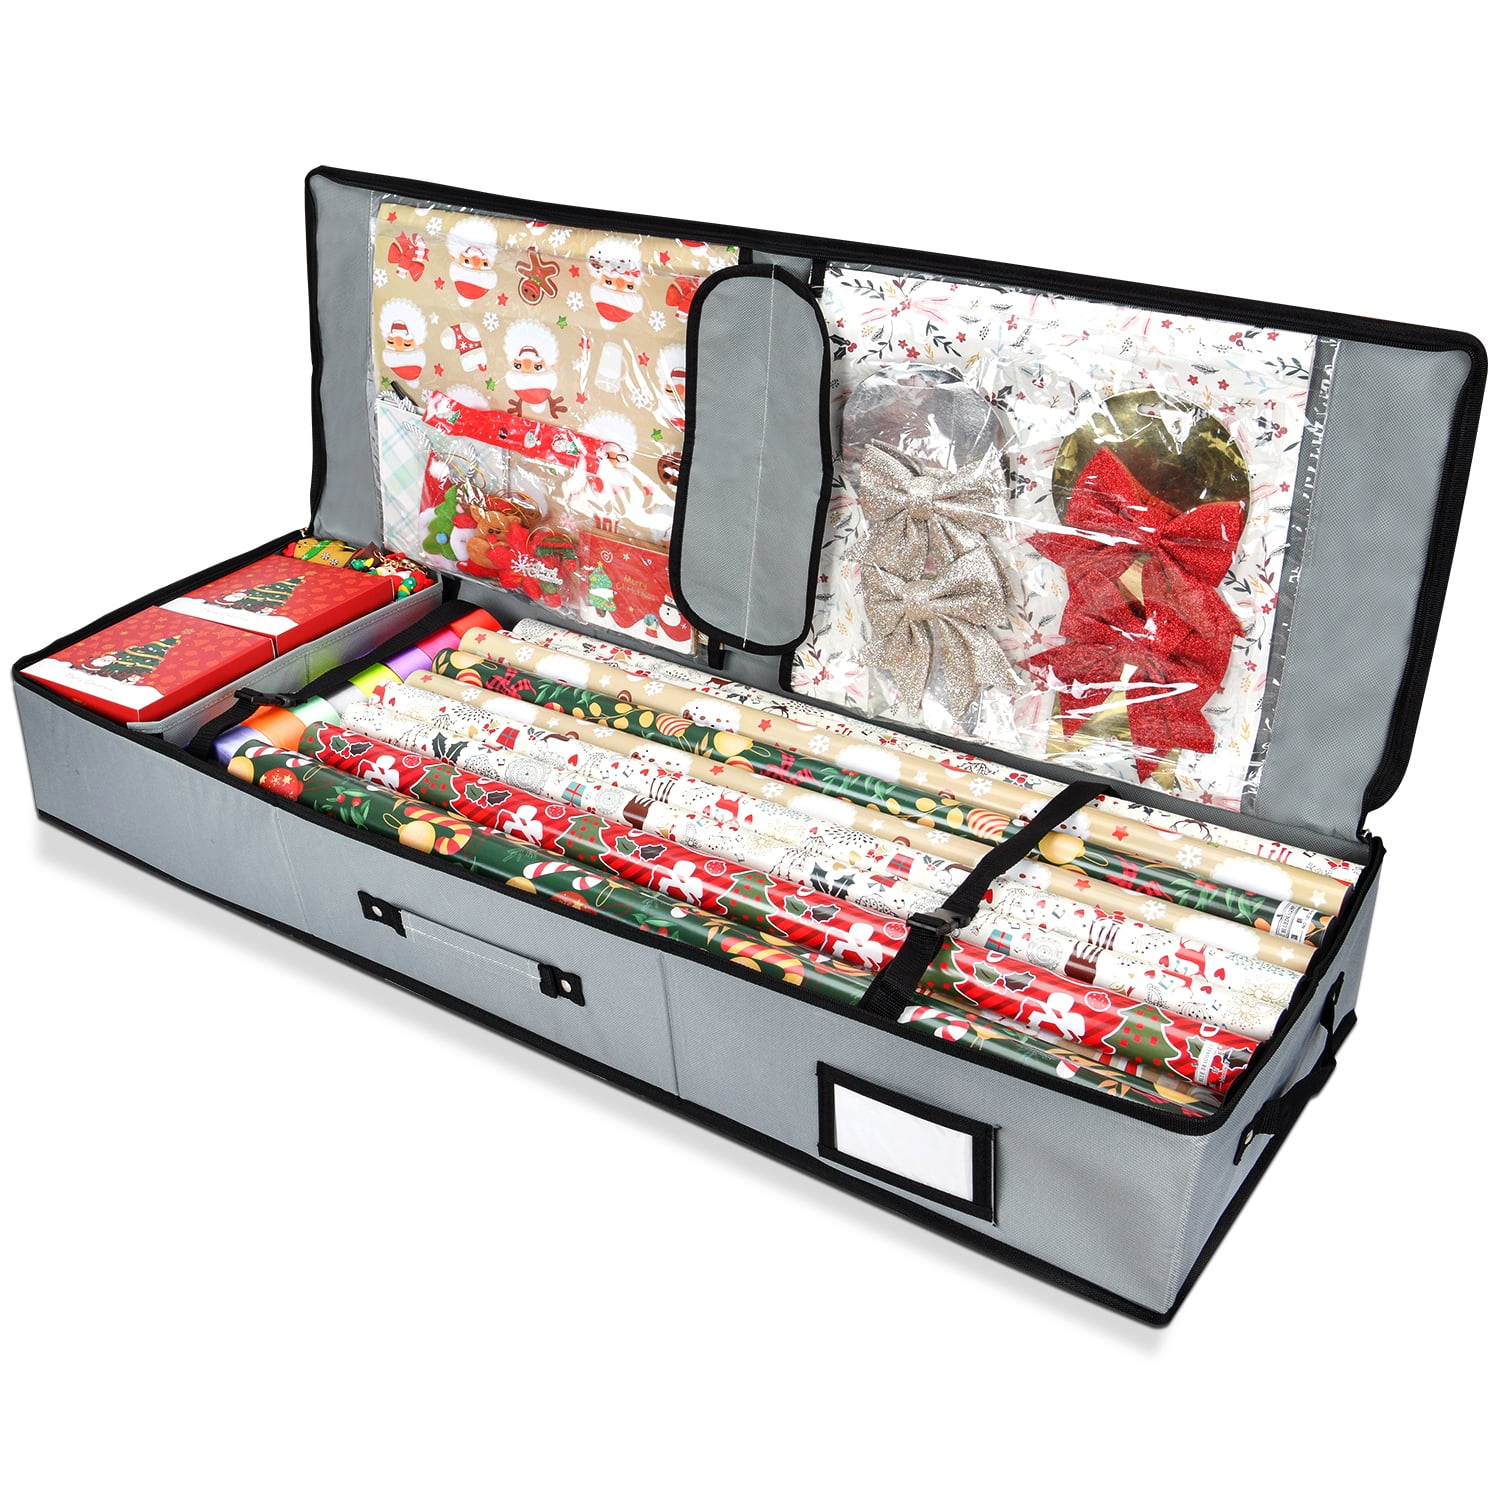 Hearth & Harbor Holiday Storage with Christmas Bins and Ribbon Organizer -  Fade Resistant Wrapping Paper Containers with Wheels Fits Up to 30 Rolls